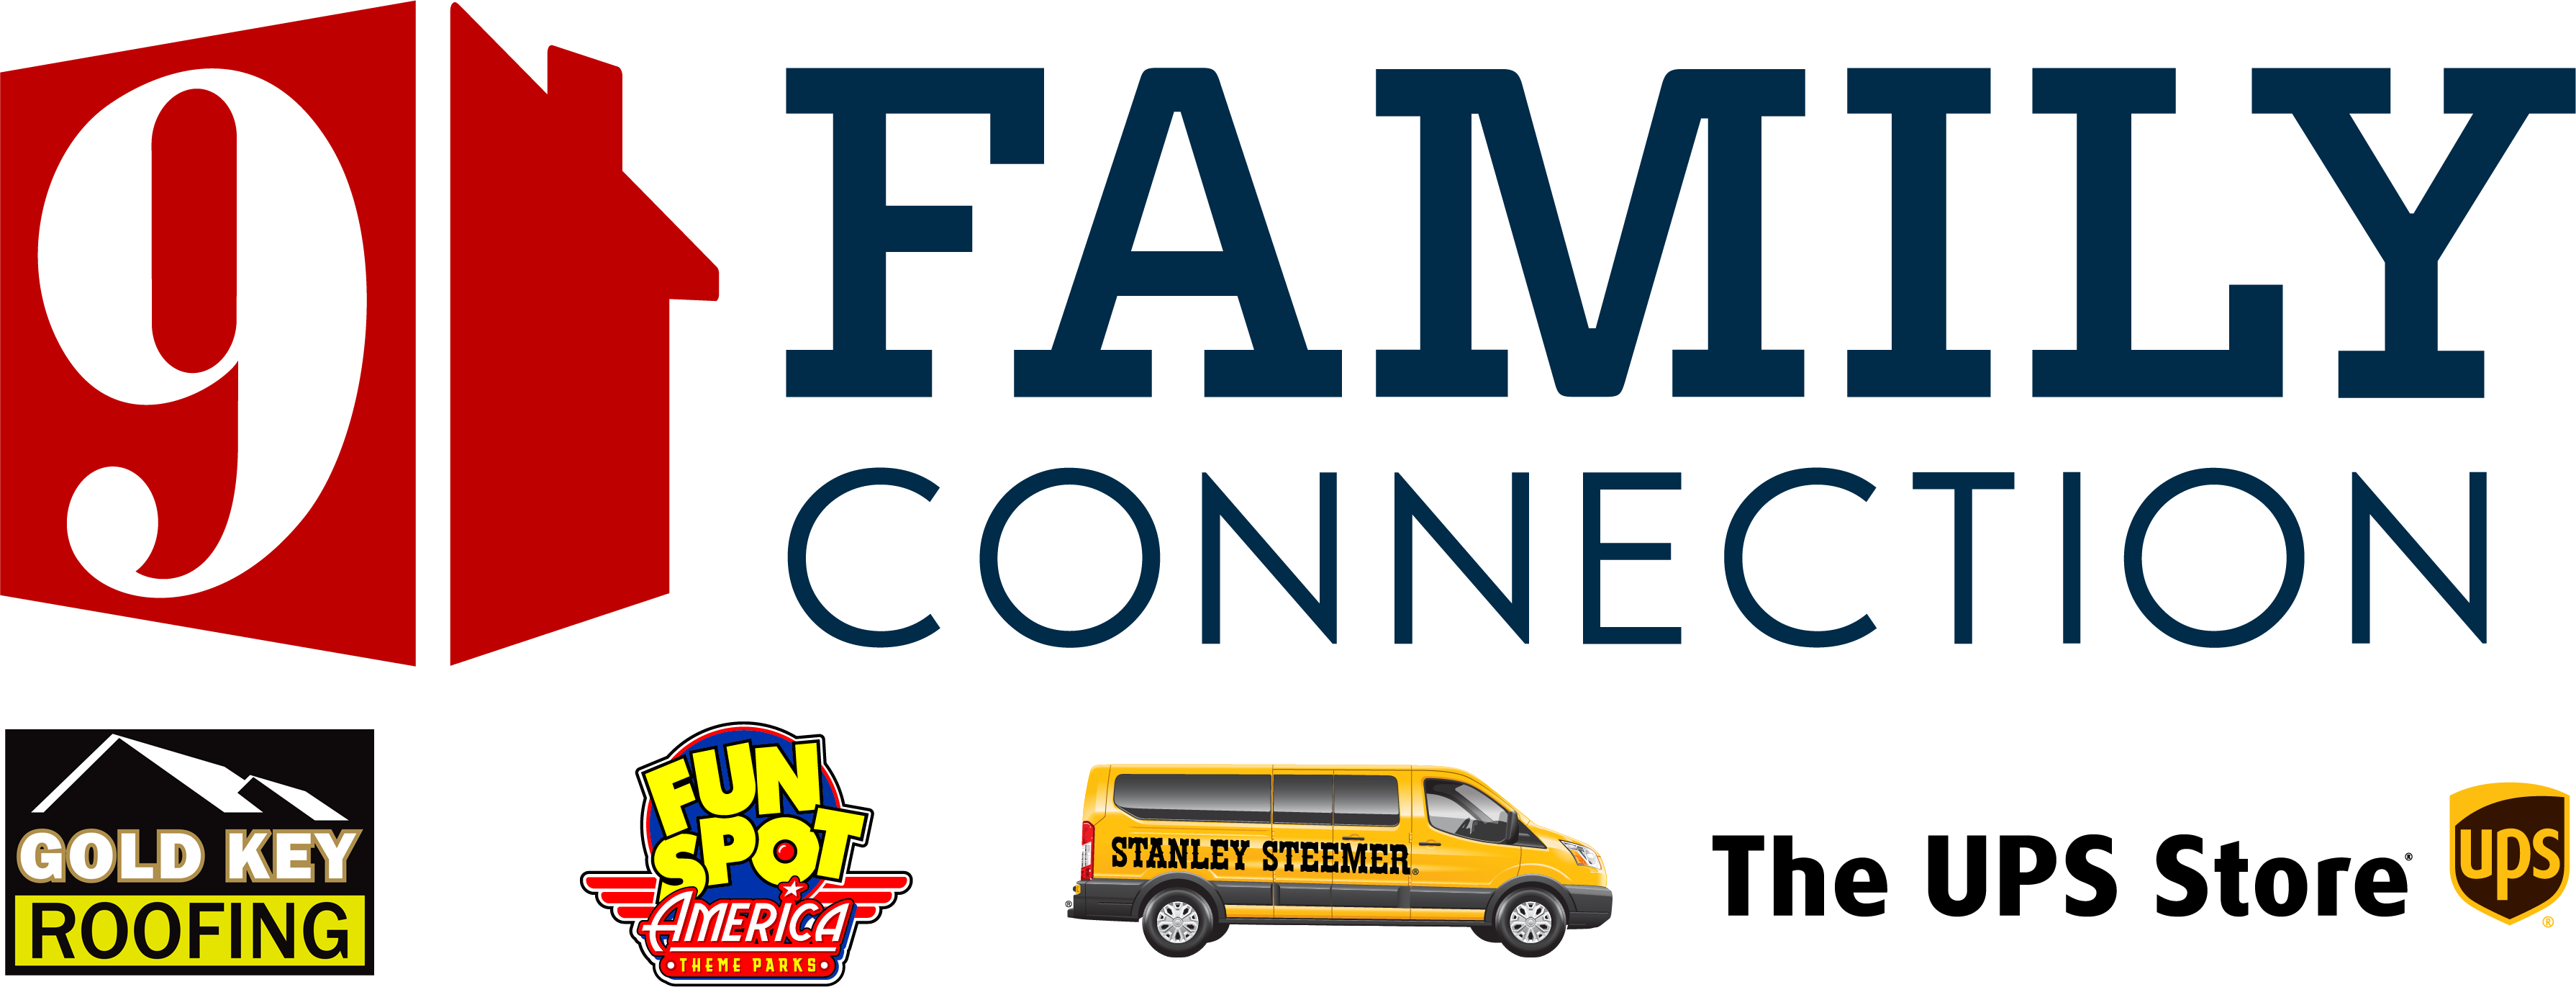 *Signature Sponsor* 9 Family Connection